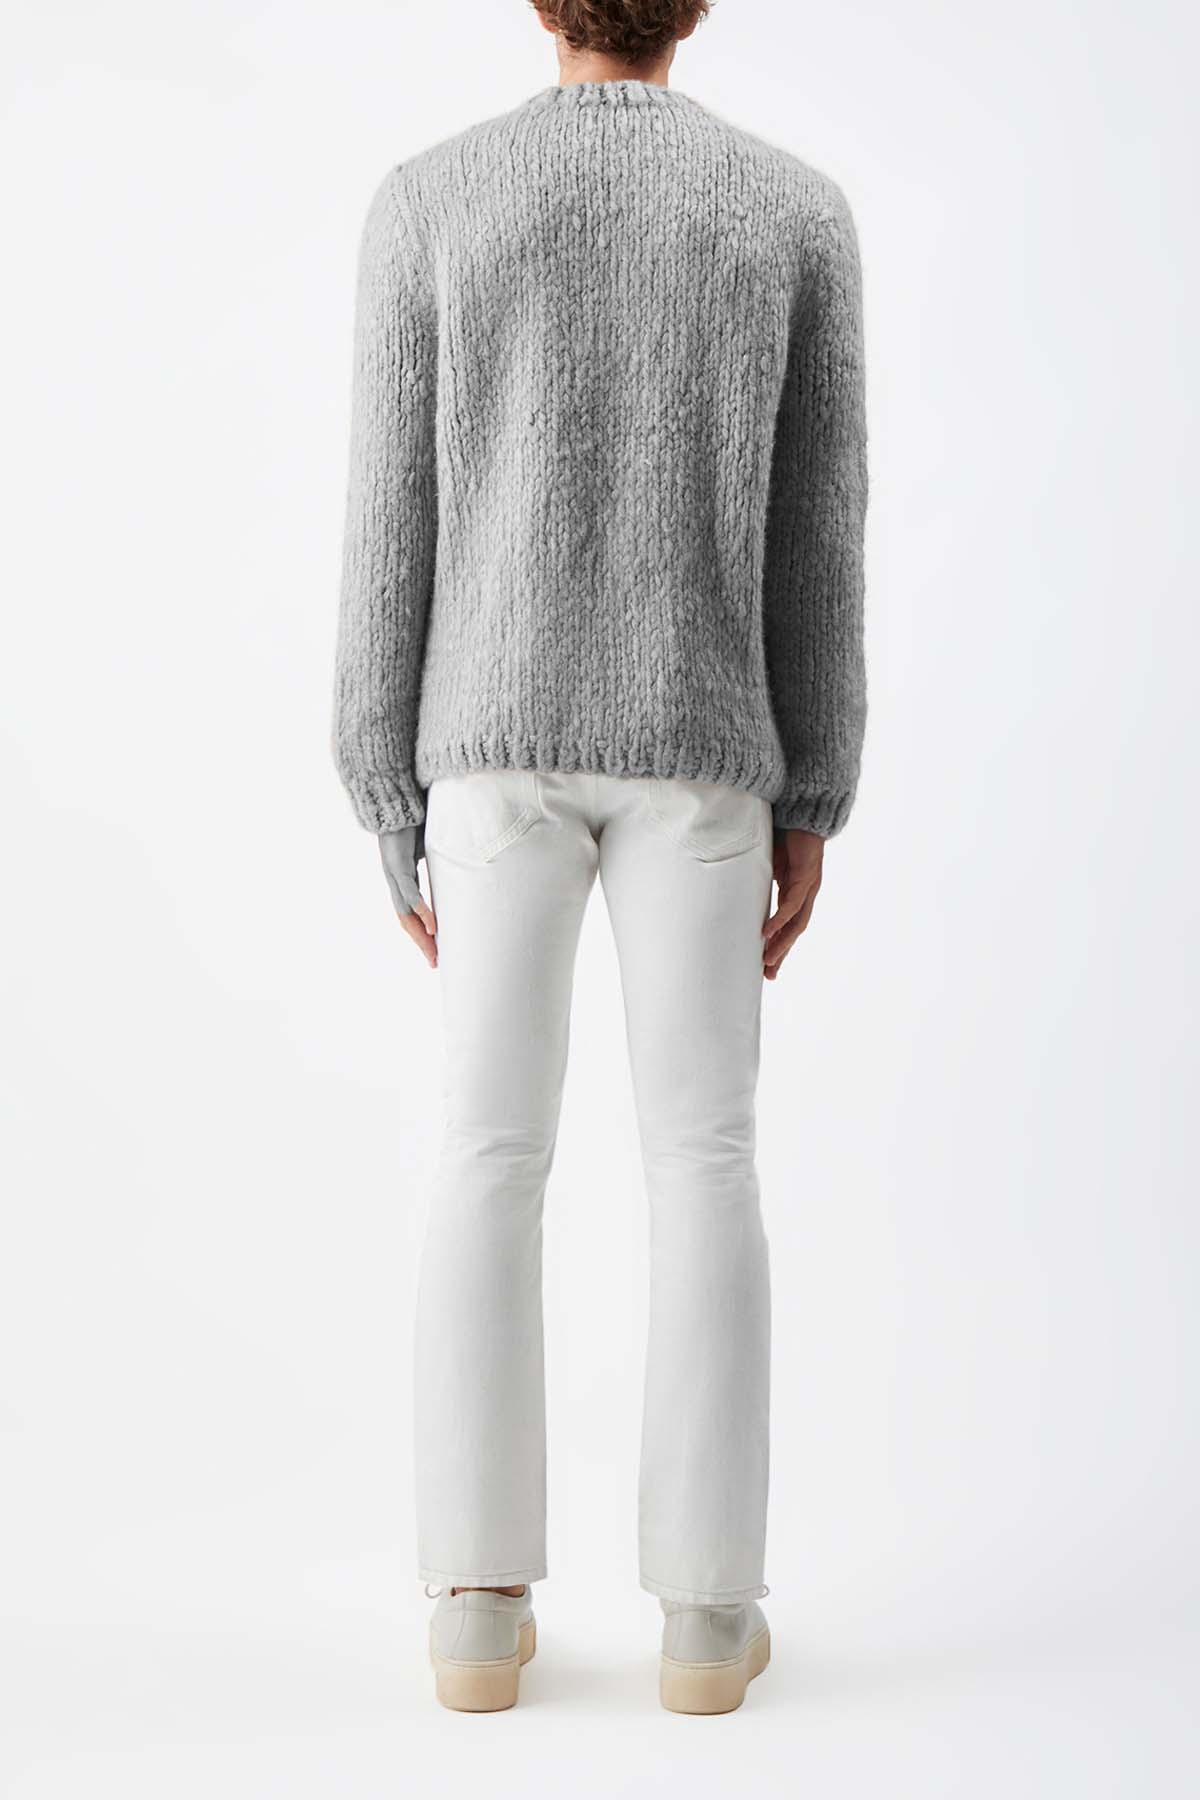 Lawrence Knit Sweater in Heather Grey Welfat Cashmere - 4